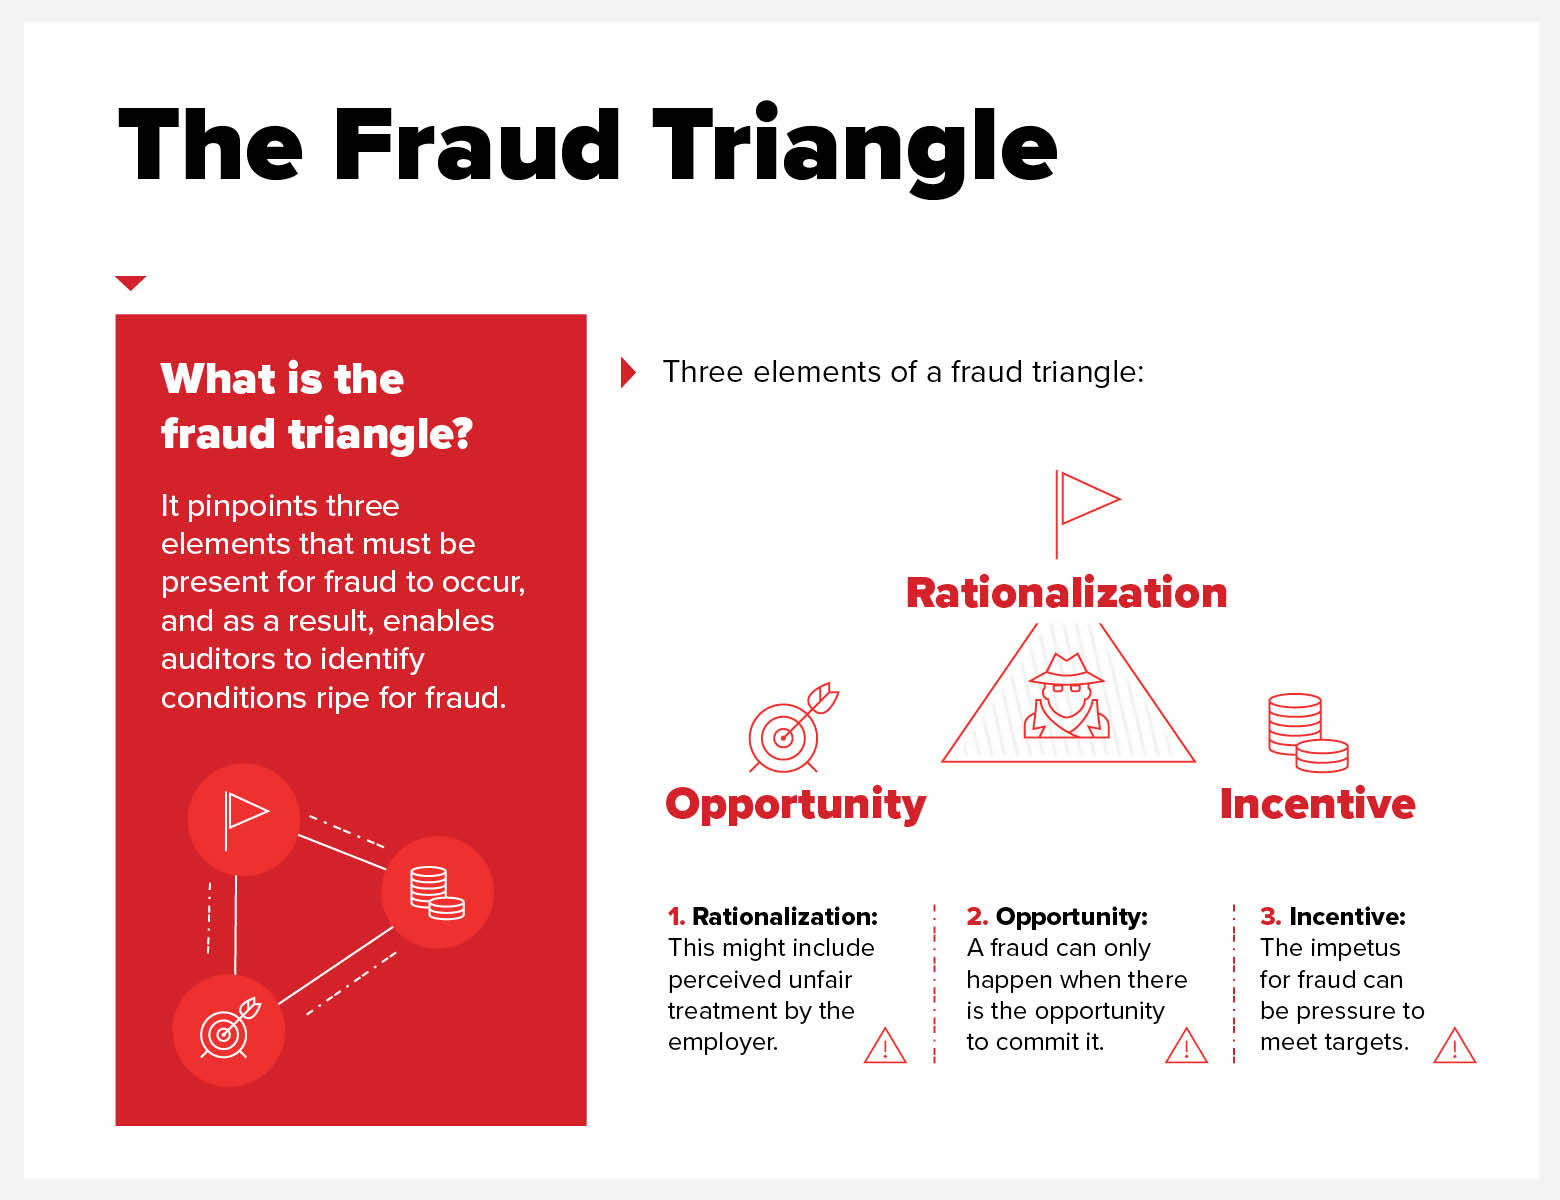 The fraud triangle pinpoints three elements that must be present for fraud to occur, and as a result, enables auditors to identify conditions ripe for fraud. Three elements of the fraud triangle include: rationalization, opportunity and incentive.